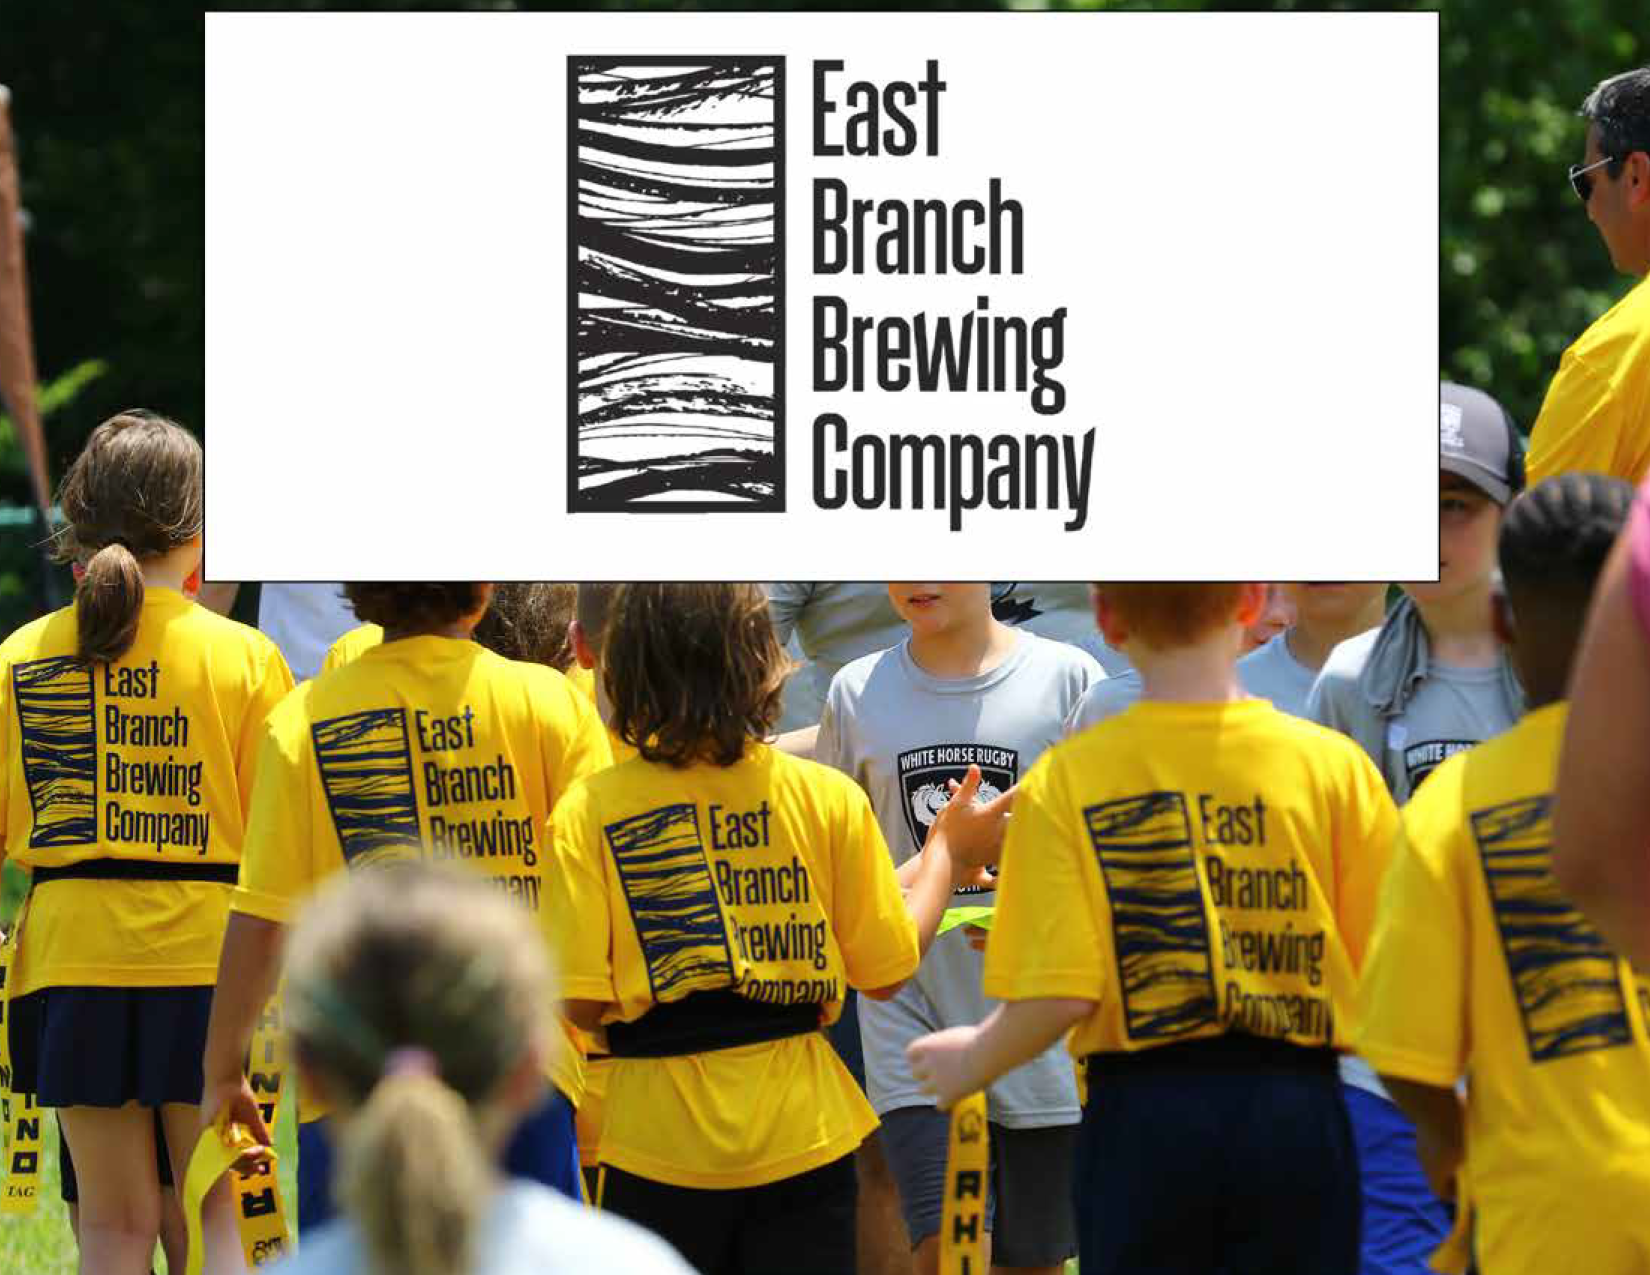 East Branch Brewing